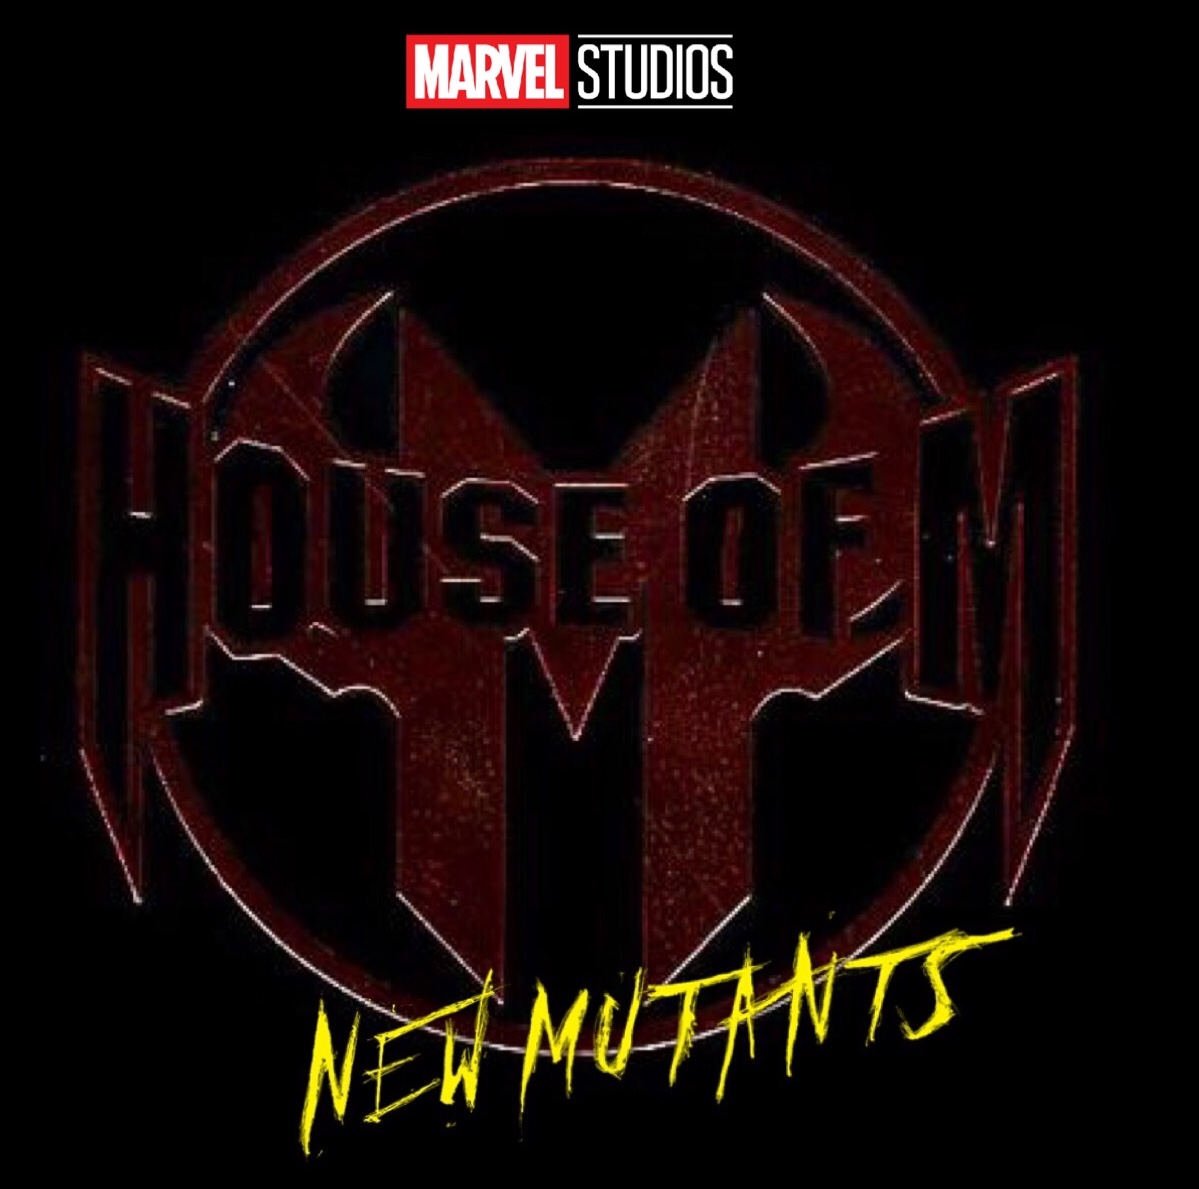 Fox S X Men And Mcu Multiverse Crossover Theory House Of M Adaptation Fandom